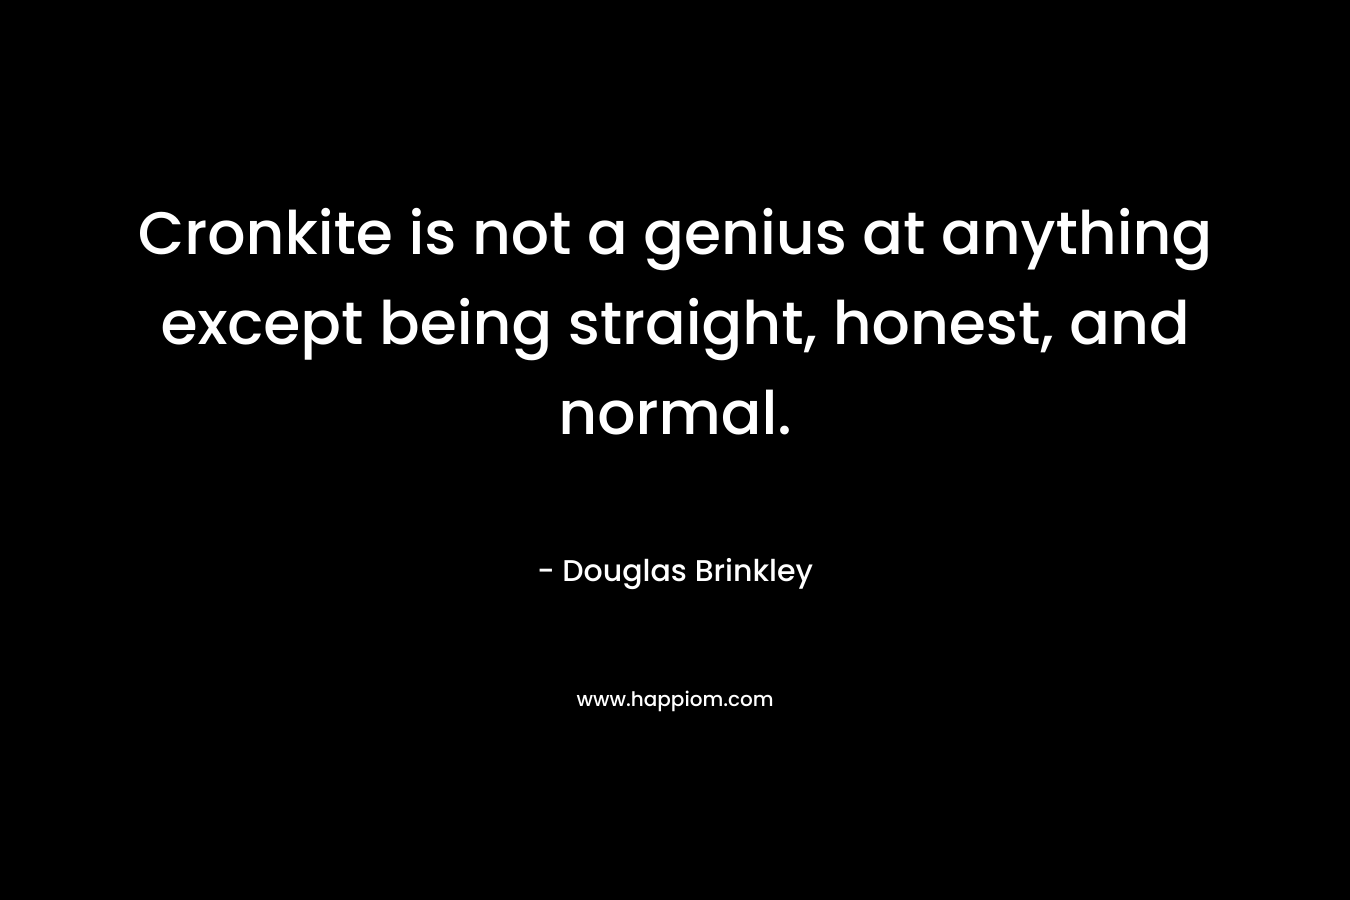 Cronkite is not a genius at anything except being straight, honest, and normal. – Douglas Brinkley